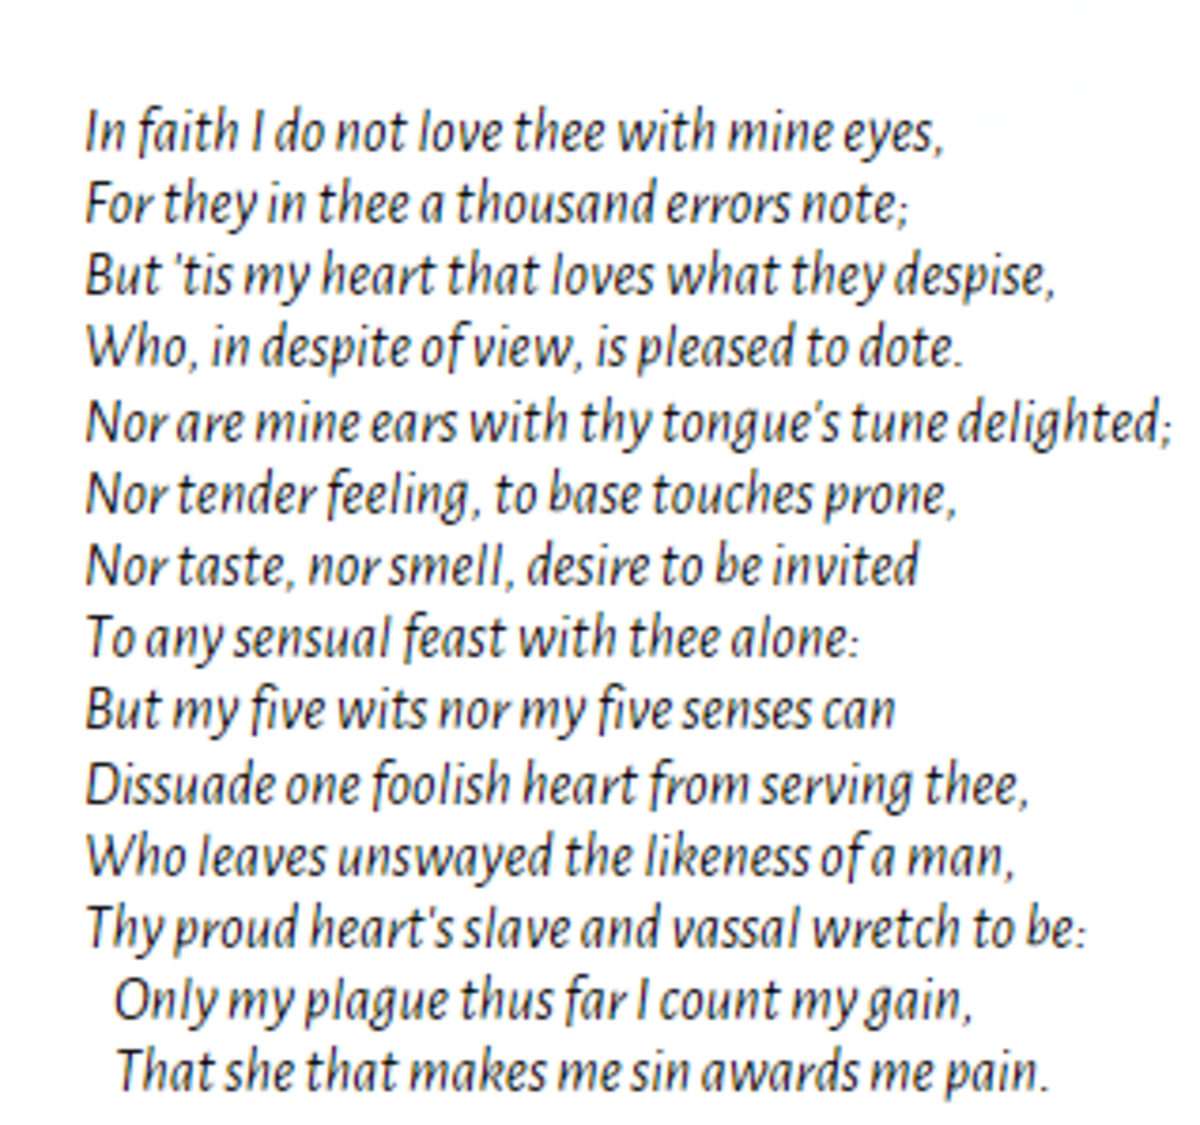 Analysis of Poem Sonnet 141 by William Shakespeare | Owlcation